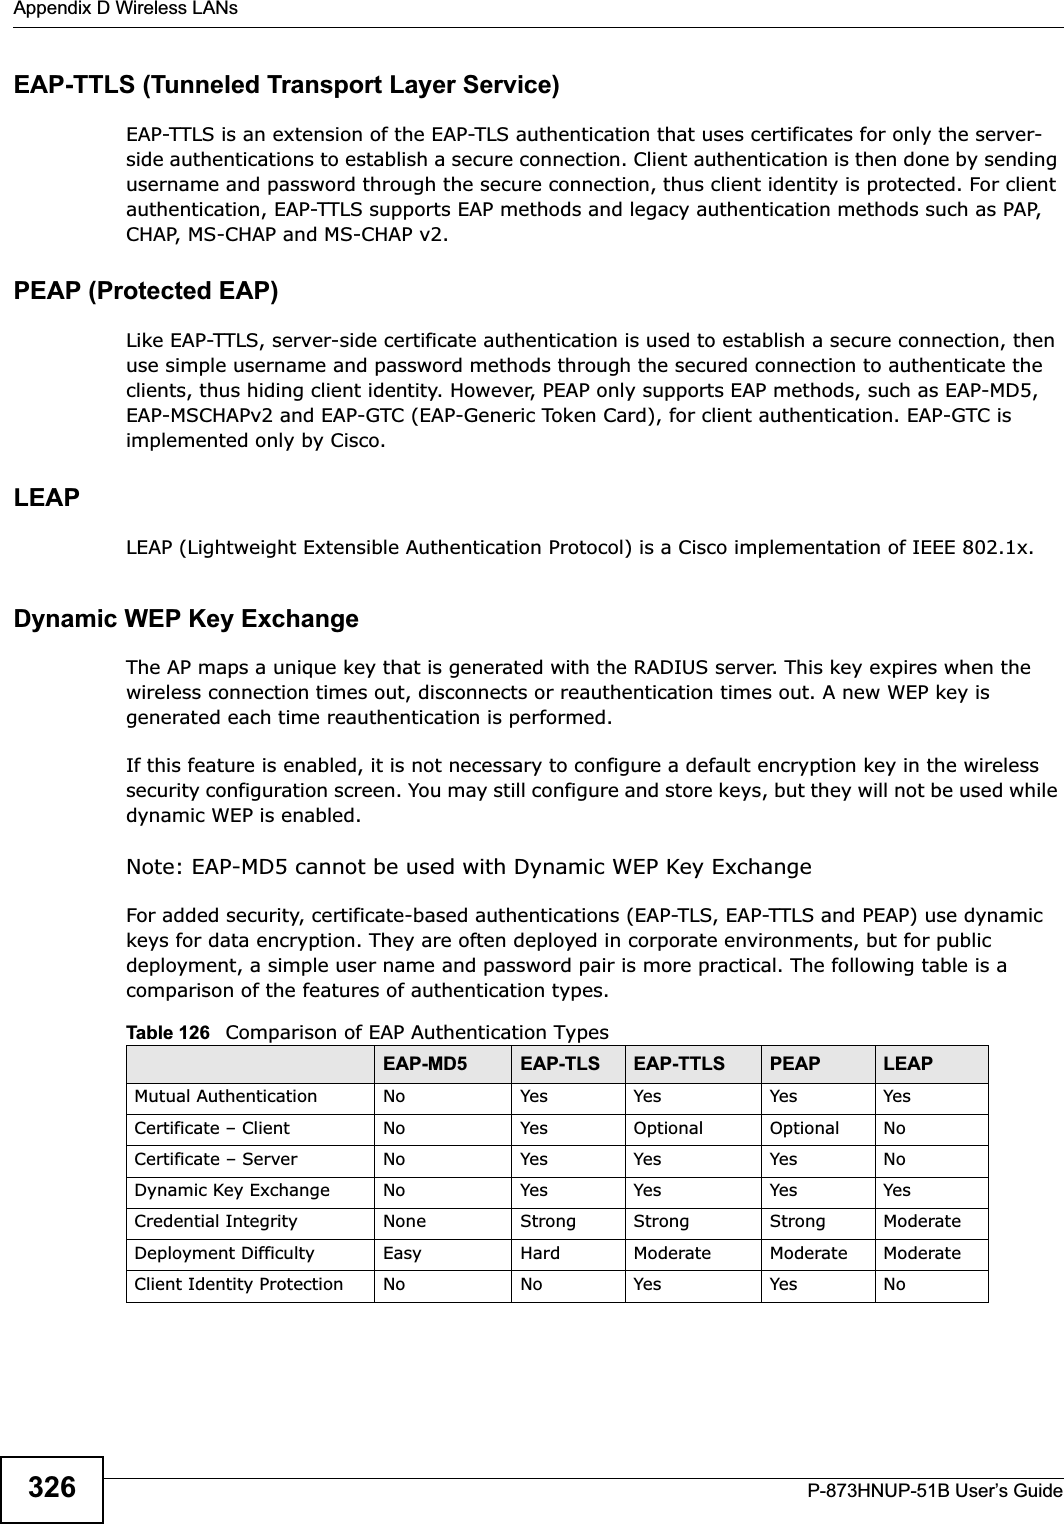 Appendix D Wireless LANsP-873HNUP-51B User’s Guide326EAP-TTLS (Tunneled Transport Layer Service) EAP-TTLS is an extension of the EAP-TLS authentication that uses certificates for only the server-side authentications to establish a secure connection. Client authentication is then done by sending username and password through the secure connection, thus client identity is protected. For client authentication, EAP-TTLS supports EAP methods and legacy authentication methods such as PAP, CHAP, MS-CHAP and MS-CHAP v2. PEAP (Protected EAP)Like EAP-TTLS, server-side certificate authentication is used to establish a secure connection, then use simple username and password methods through the secured connection to authenticate the clients, thus hiding client identity. However, PEAP only supports EAP methods, such as EAP-MD5, EAP-MSCHAPv2 and EAP-GTC (EAP-Generic Token Card), for client authentication. EAP-GTC is implemented only by Cisco.LEAPLEAP (Lightweight Extensible Authentication Protocol) is a Cisco implementation of IEEE 802.1x. Dynamic WEP Key ExchangeThe AP maps a unique key that is generated with the RADIUS server. This key expires when the wireless connection times out, disconnects or reauthentication times out. A new WEP key is generated each time reauthentication is performed.If this feature is enabled, it is not necessary to configure a default encryption key in the wireless security configuration screen. You may still configure and store keys, but they will not be used while dynamic WEP is enabled.Note: EAP-MD5 cannot be used with Dynamic WEP Key ExchangeFor added security, certificate-based authentications (EAP-TLS, EAP-TTLS and PEAP) use dynamic keys for data encryption. They are often deployed in corporate environments, but for public deployment, a simple user name and password pair is more practical. The following table is a comparison of the features of authentication types.Table 126   Comparison of EAP Authentication TypesEAP-MD5 EAP-TLS EAP-TTLS PEAP LEAPMutual Authentication No Yes Yes Yes YesCertificate – Client No Yes Optional Optional NoCertificate – Server No Yes Yes Yes NoDynamic Key Exchange No Yes Yes Yes YesCredential Integrity None Strong Strong Strong ModerateDeployment Difficulty Easy Hard Moderate Moderate ModerateClient Identity Protection No No Yes Yes No